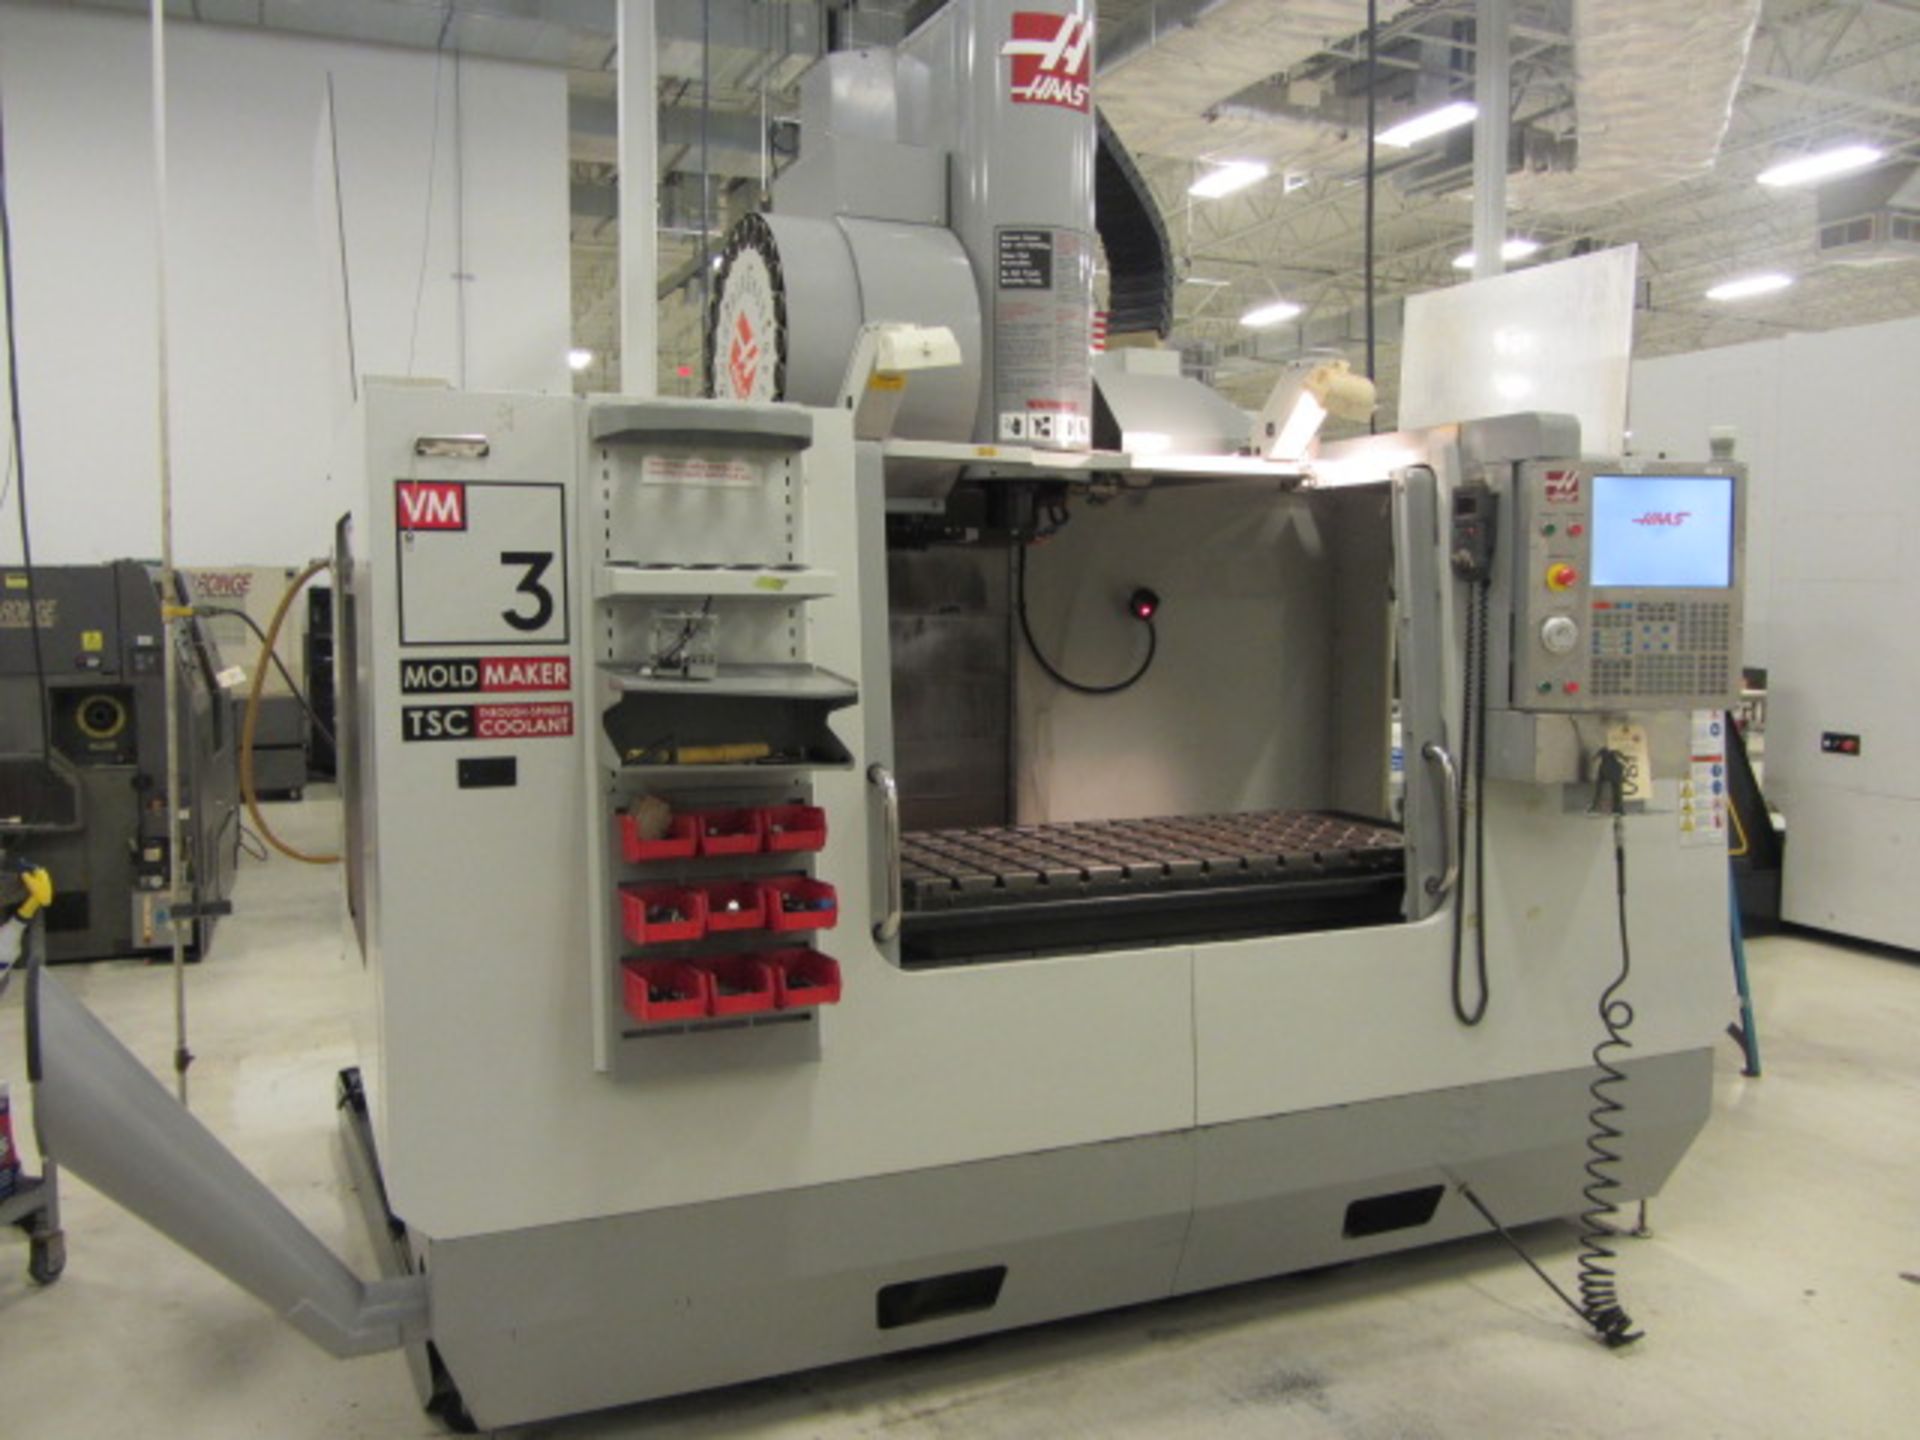 Haas VM-3 Mold Maker CNC Vertical Machining Center with 54'' x 24'' Table, #40 Taper Spindle - Image 2 of 10